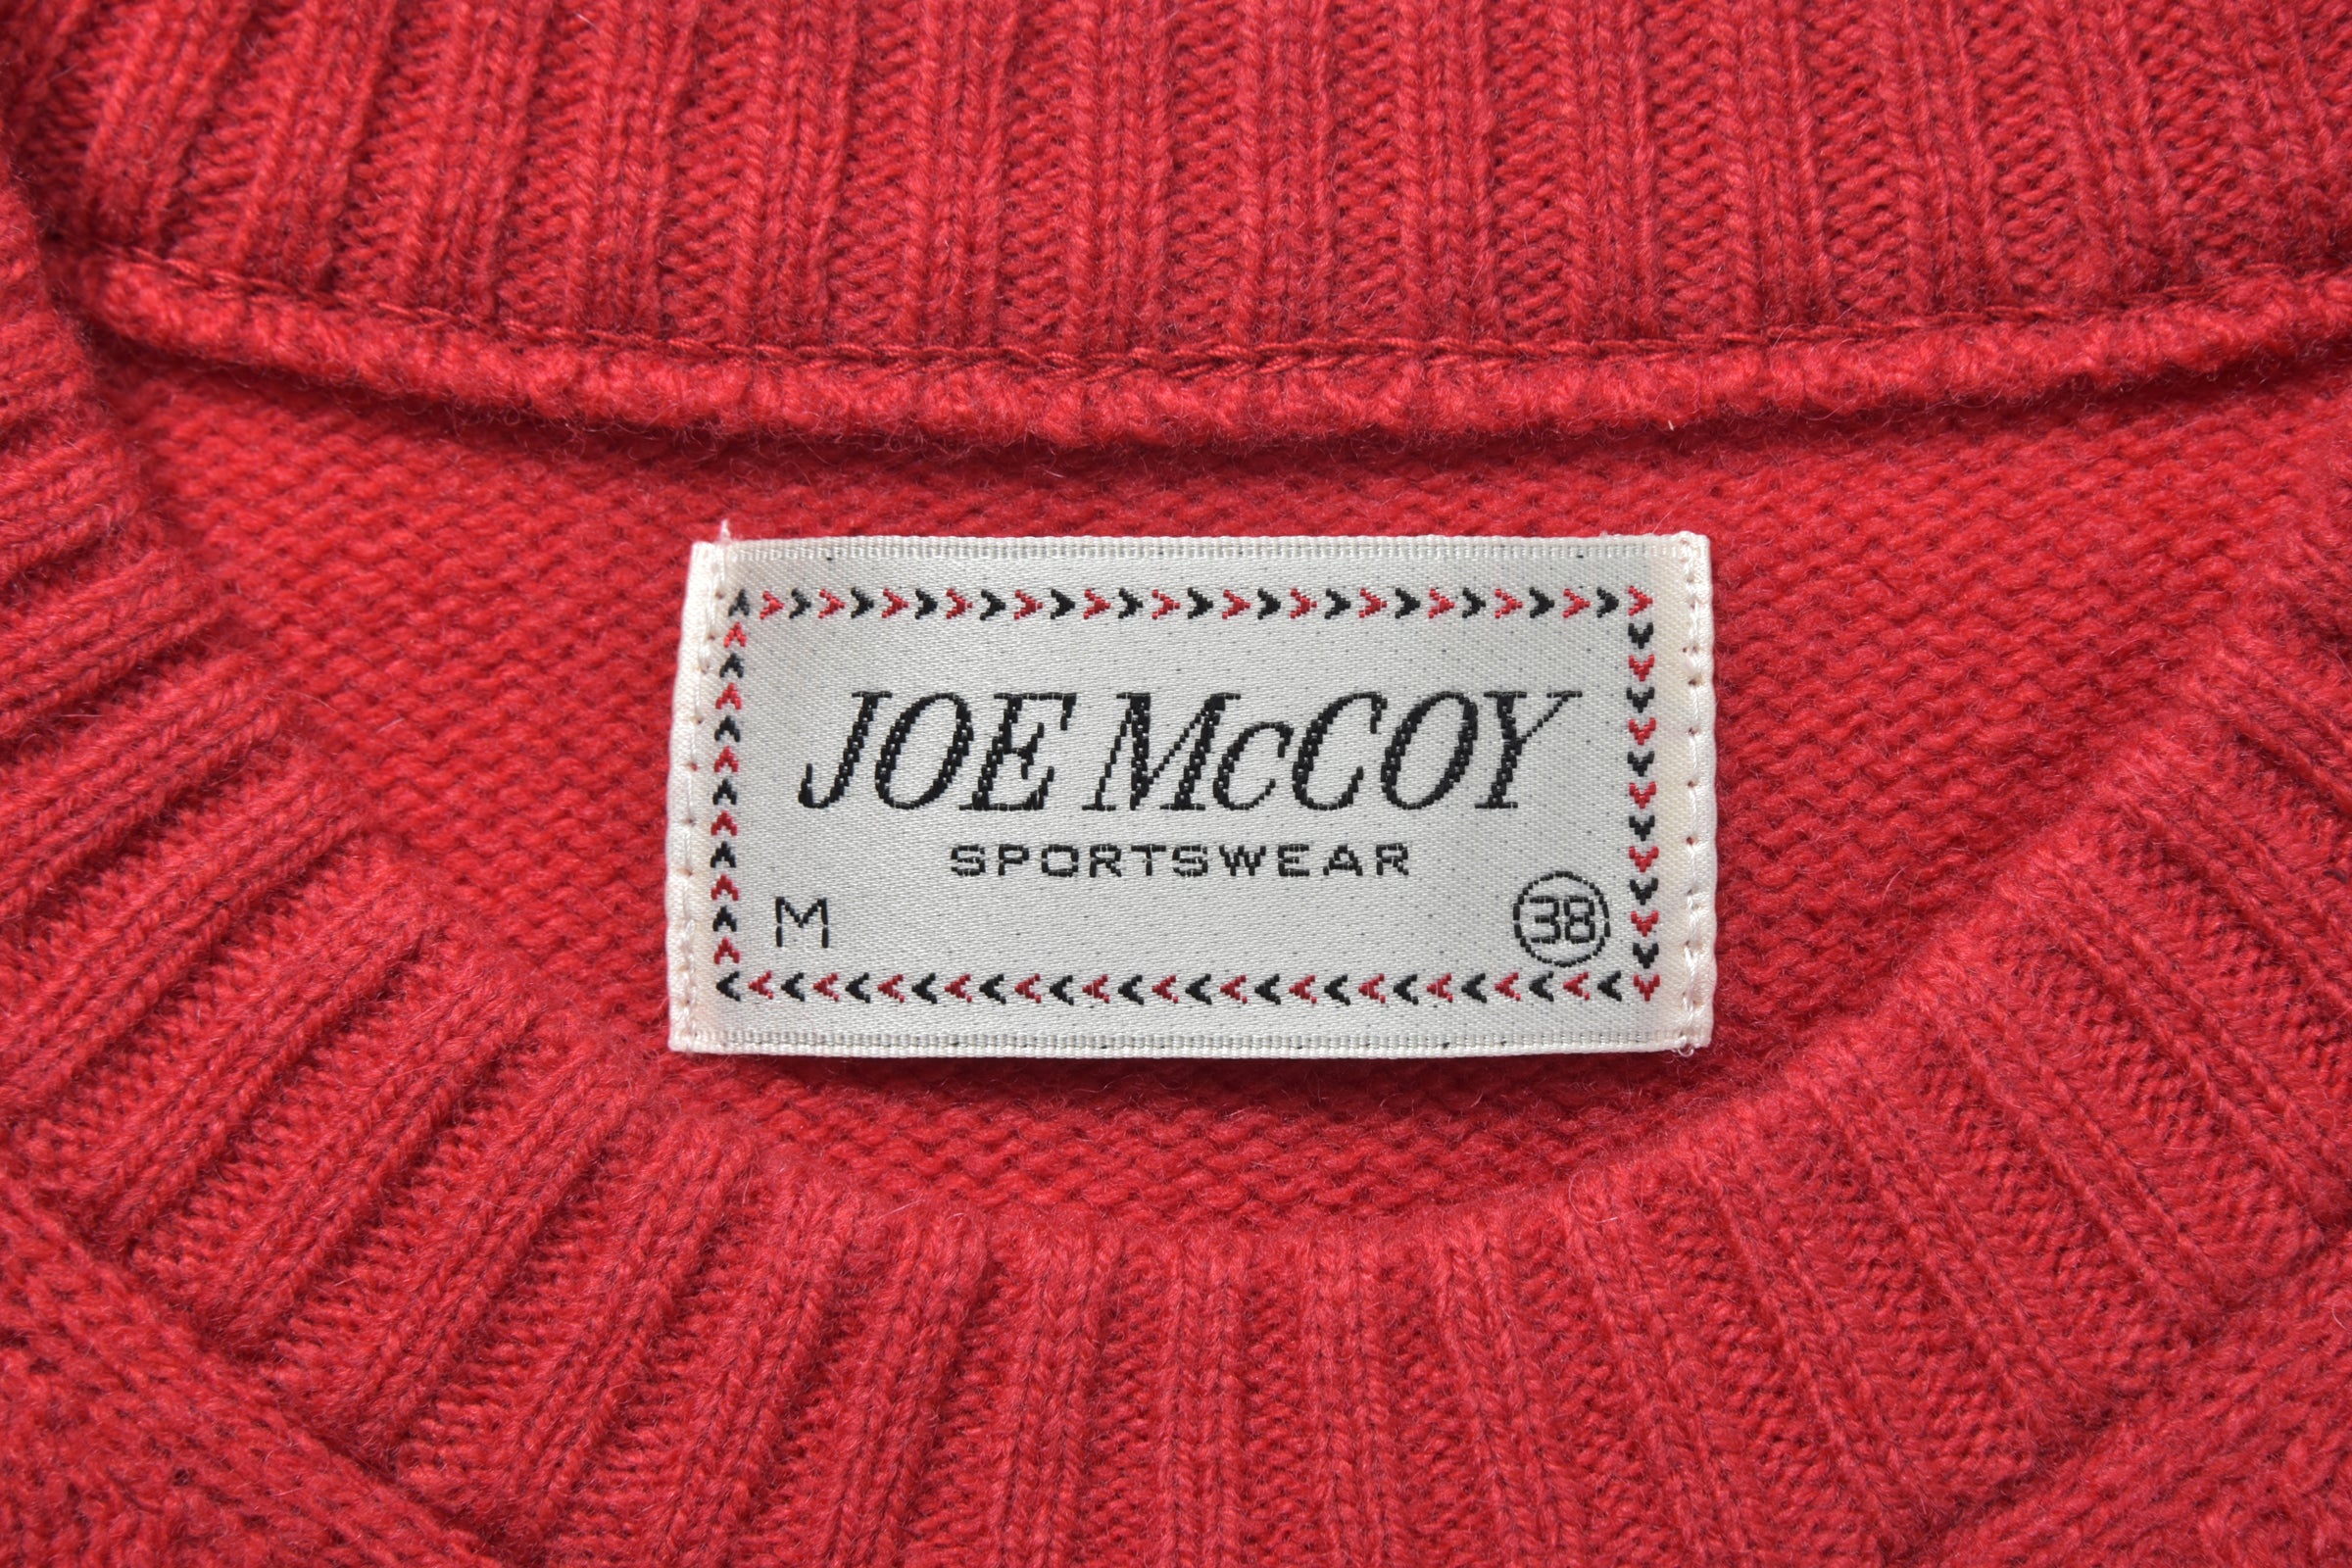 WOOL CREWNECK SWEATER – The Real McCoy's